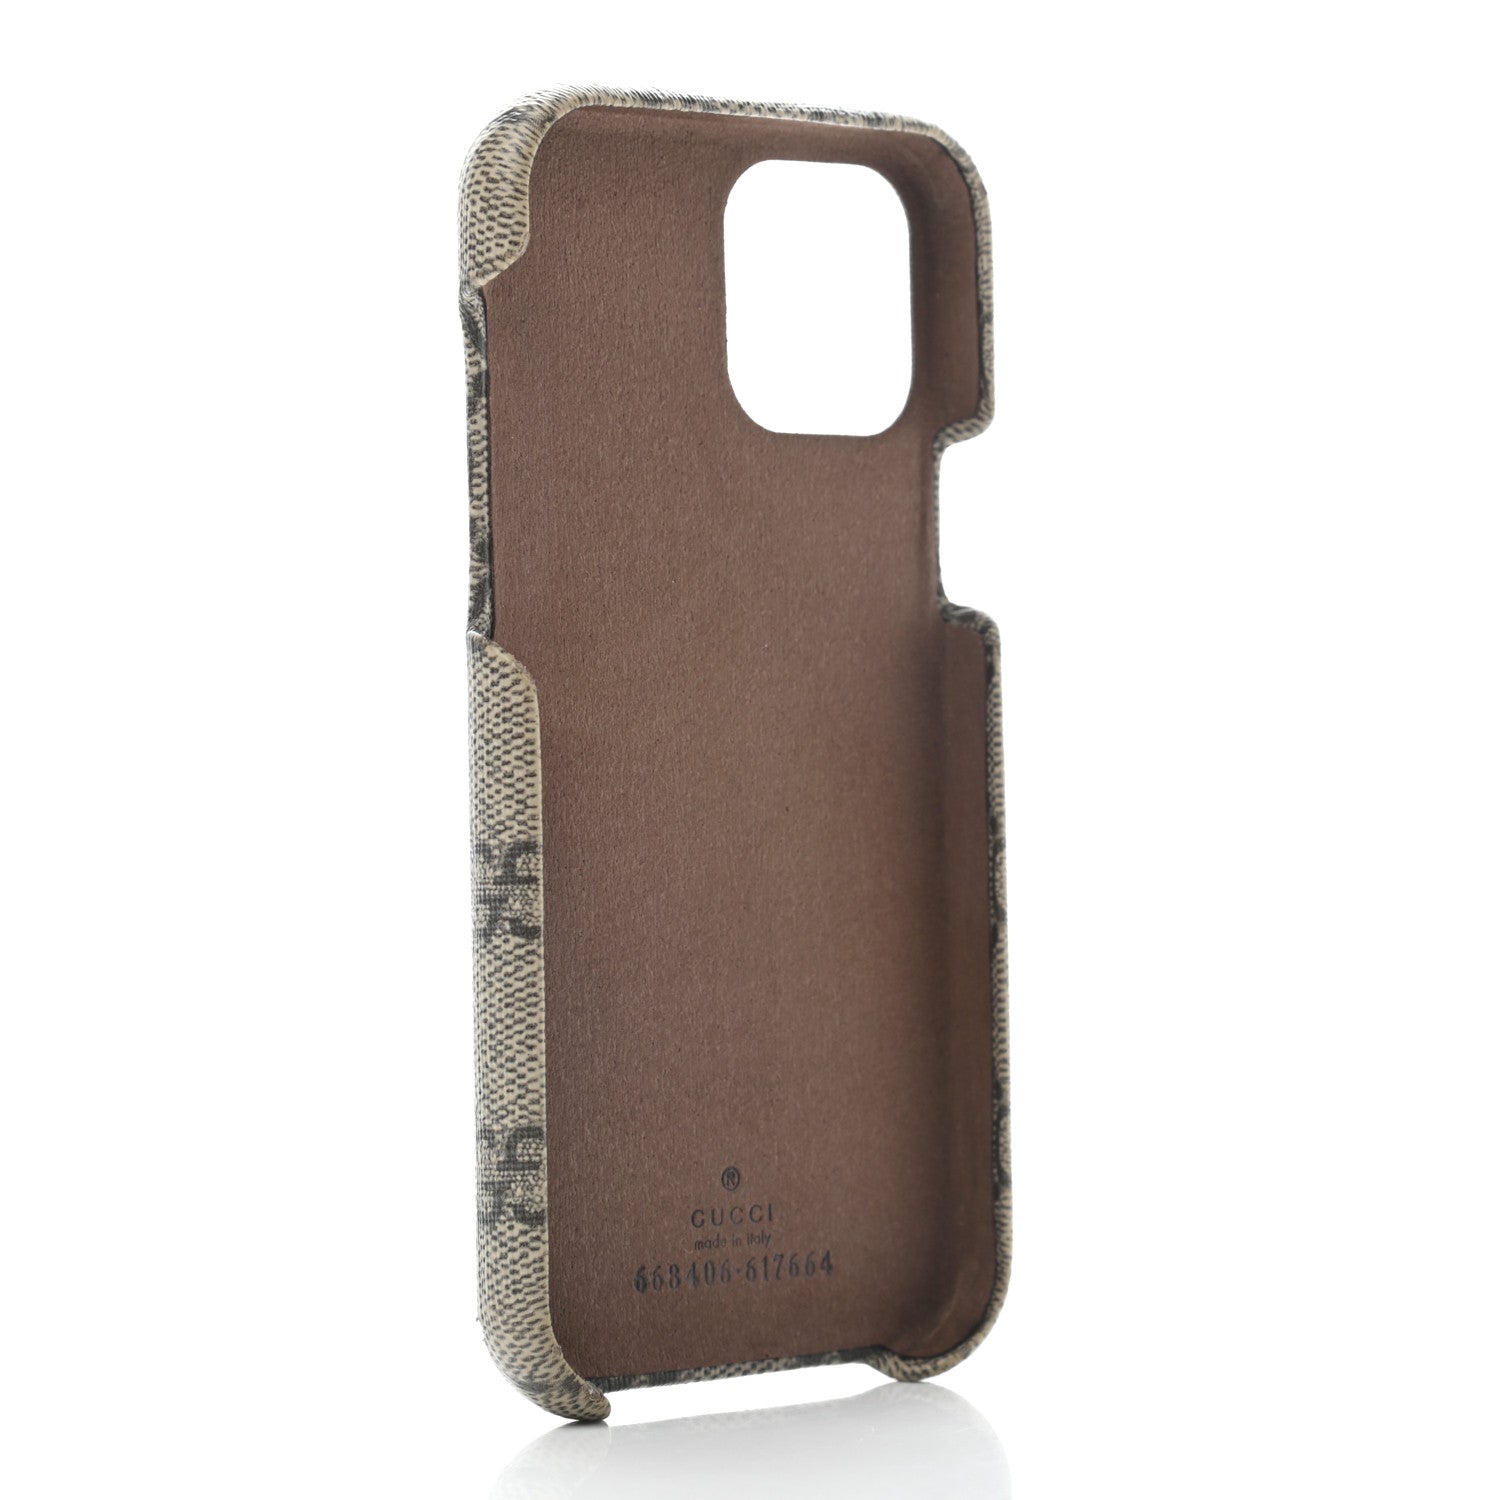 Ophidia case for iPhone 13 Pro Max